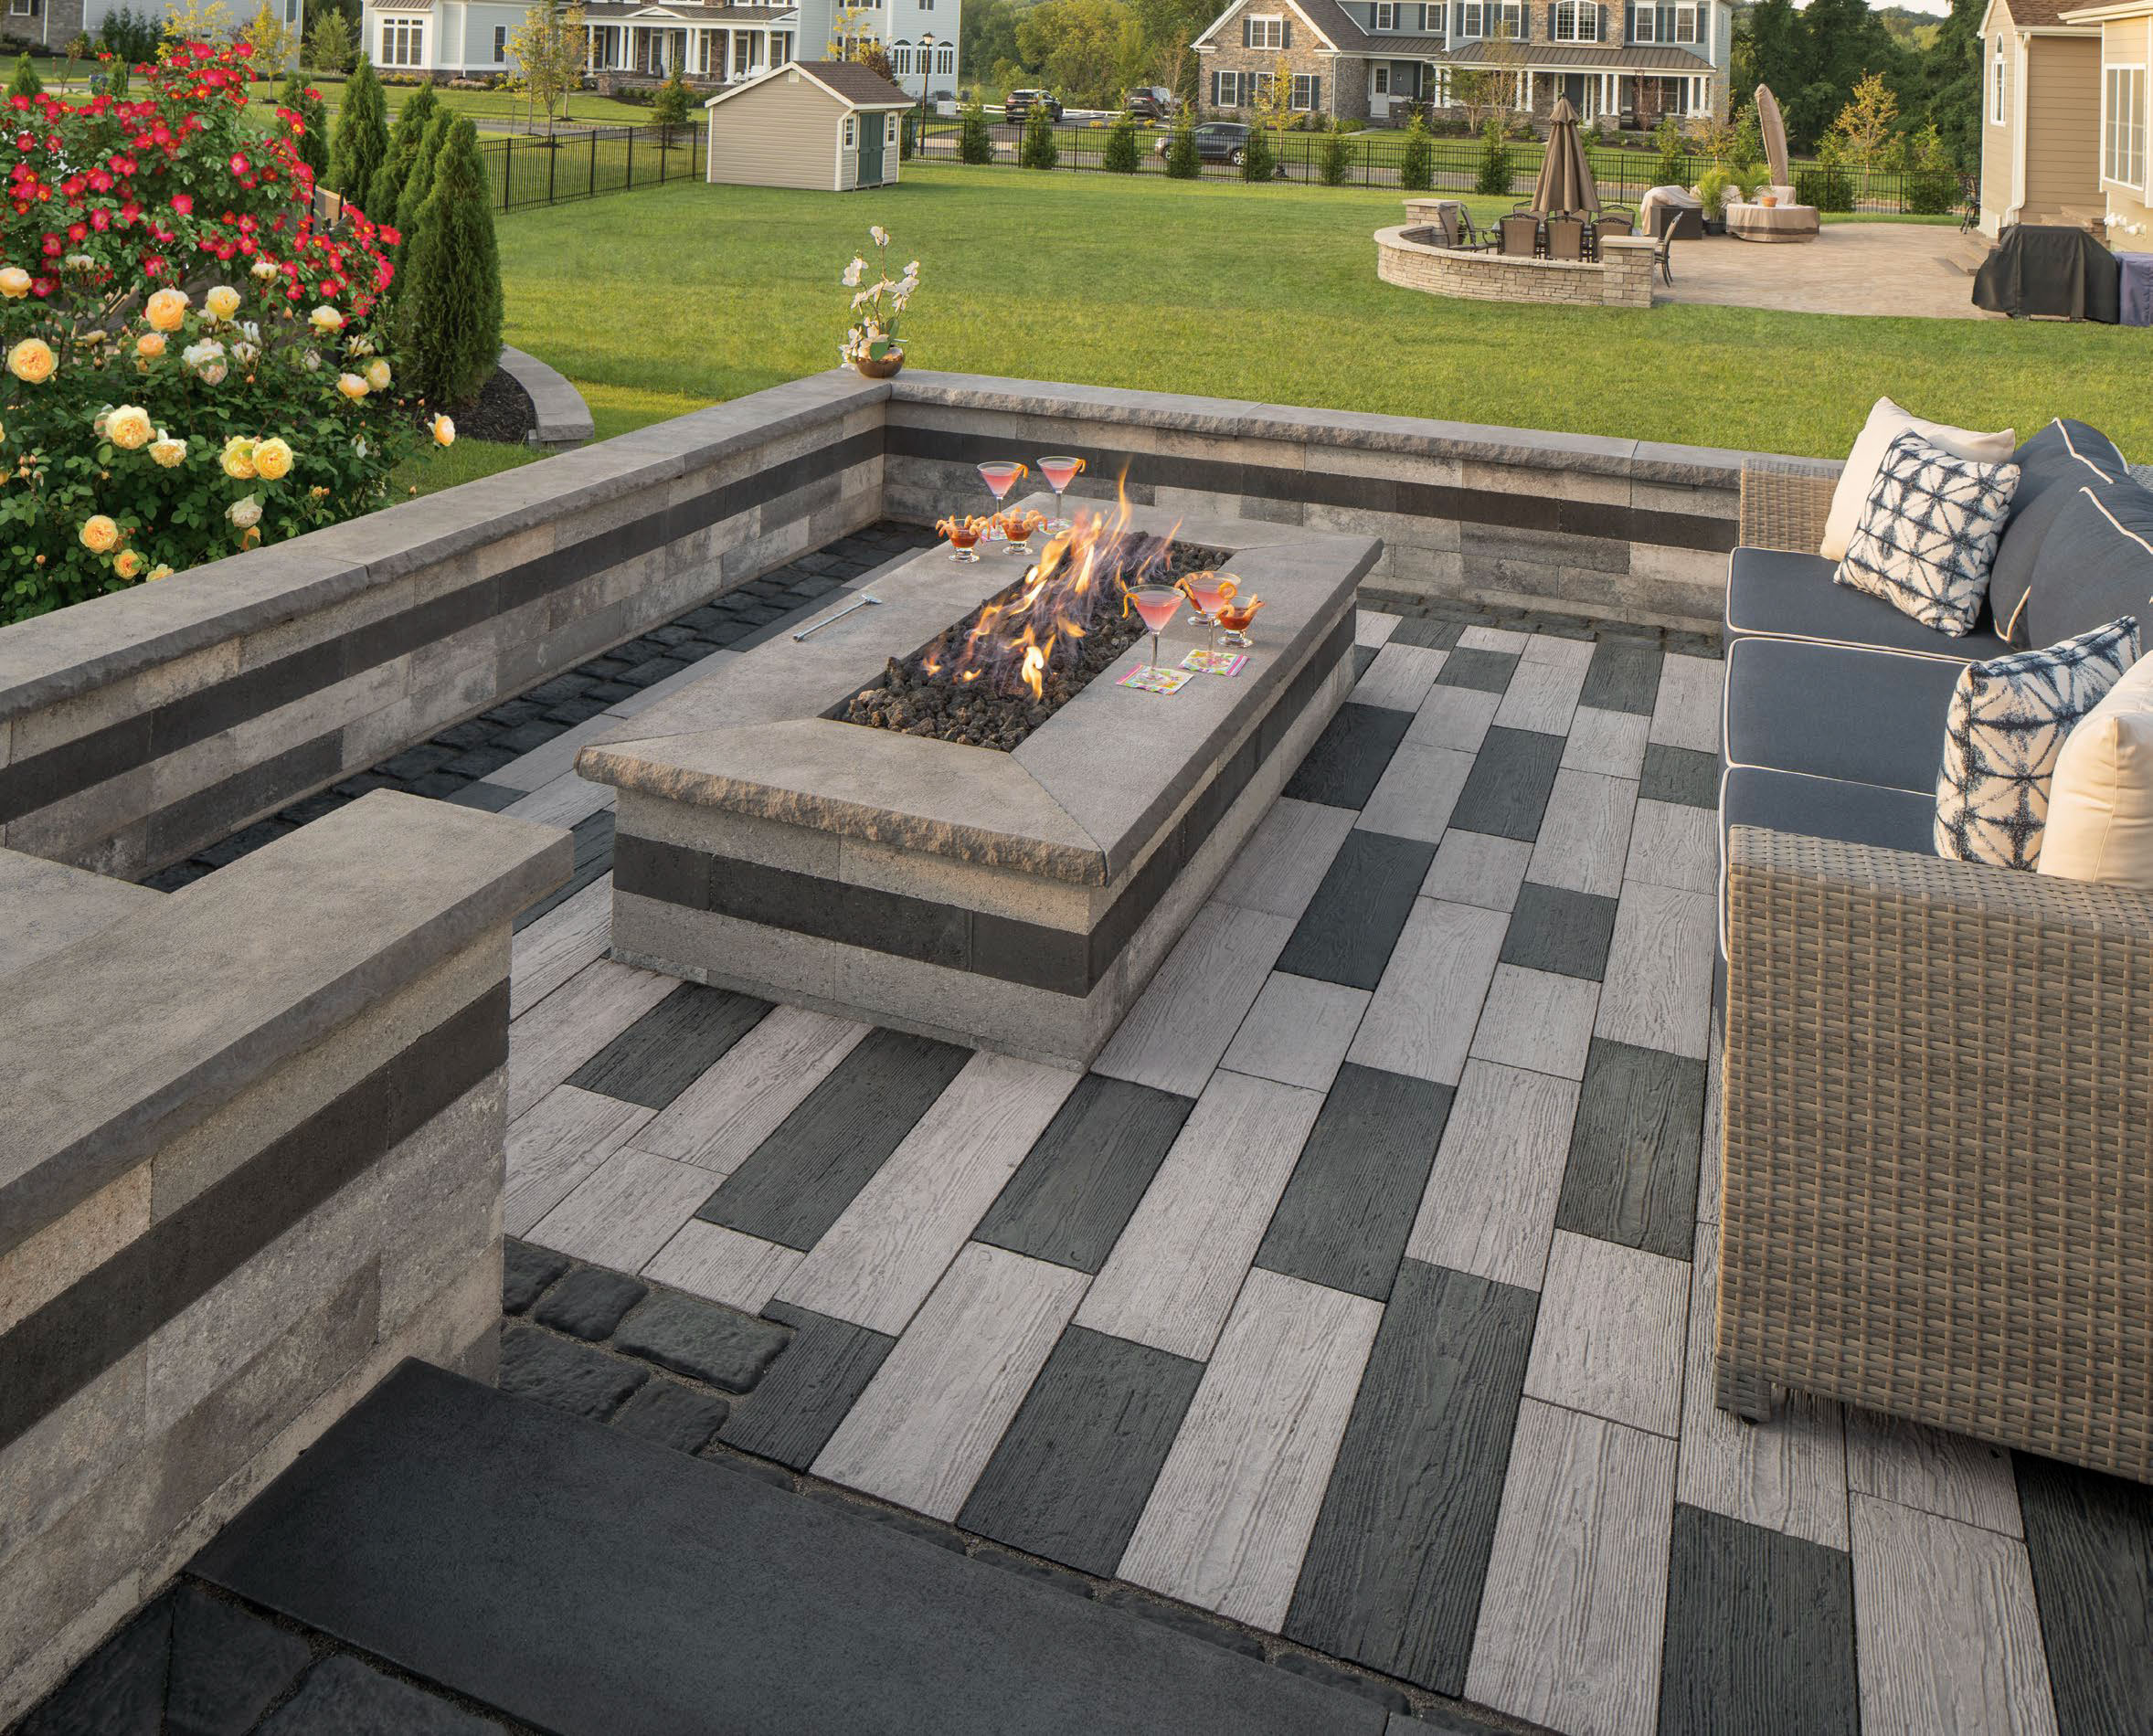 Cambridge Timber Stone Patio with Fire Pit & Seating Wall | Astro